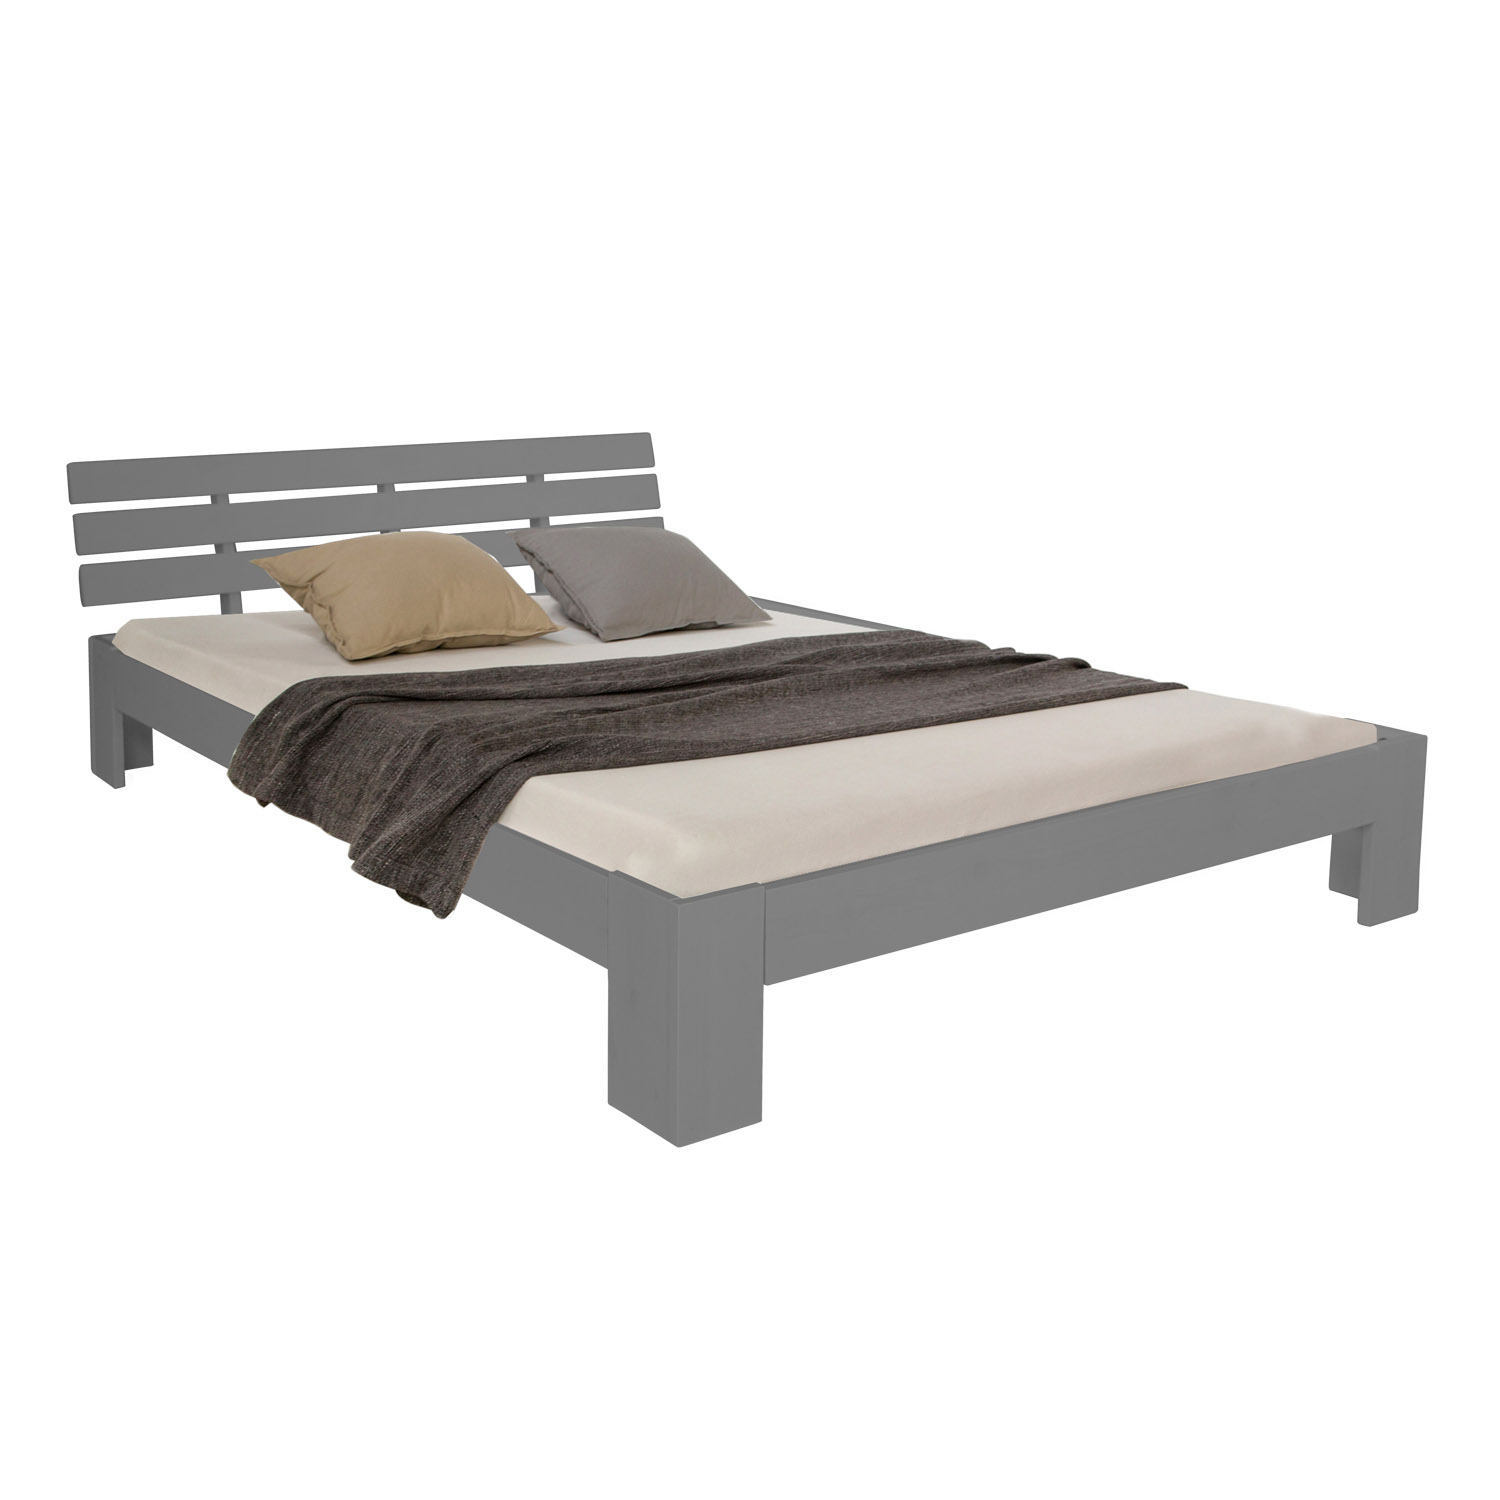 Double Bed Wooden Bed Futon Bed 180x200 Grey Pine Bed Frame Solid Wood